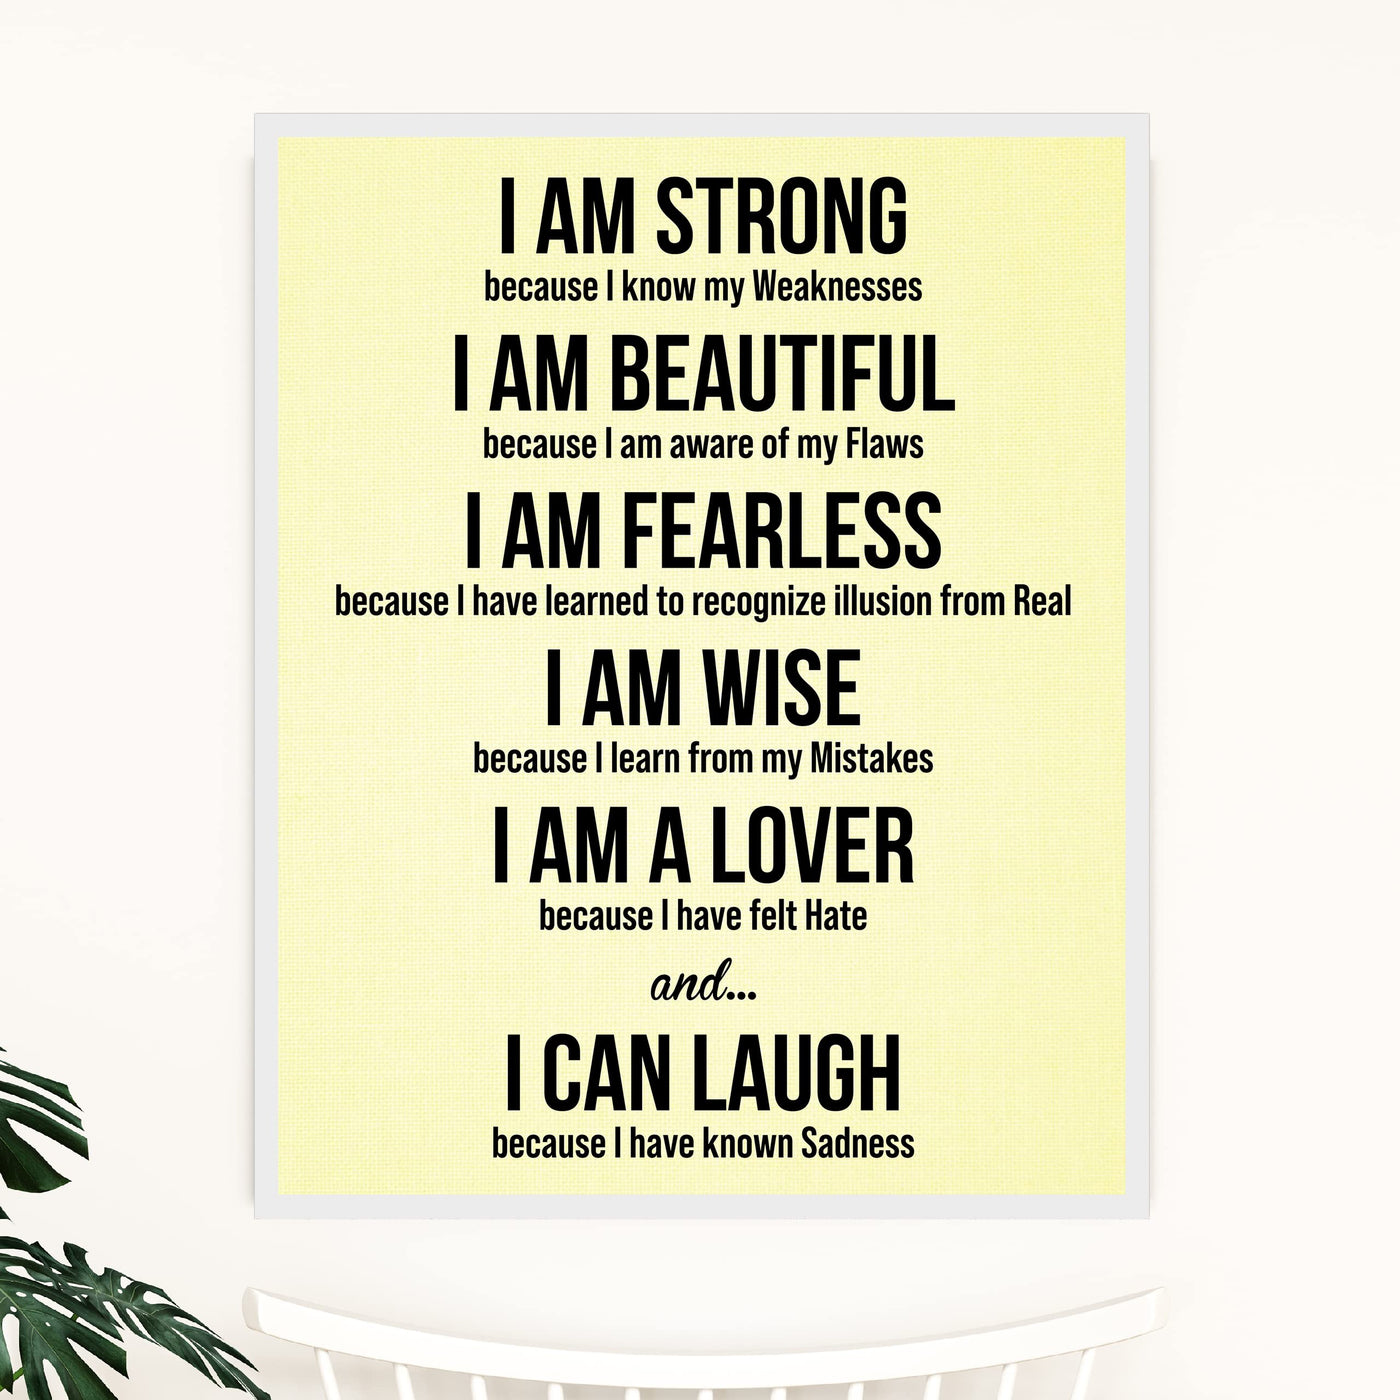 I Am Strong Because I Know My Weaknesses Motivational Quotes Wall Sign -11 x 14" Modern Inspirational Art Print -Ready to Frame. Great for Home-Office-Classroom Decor. Perfect Life Lessons for All!